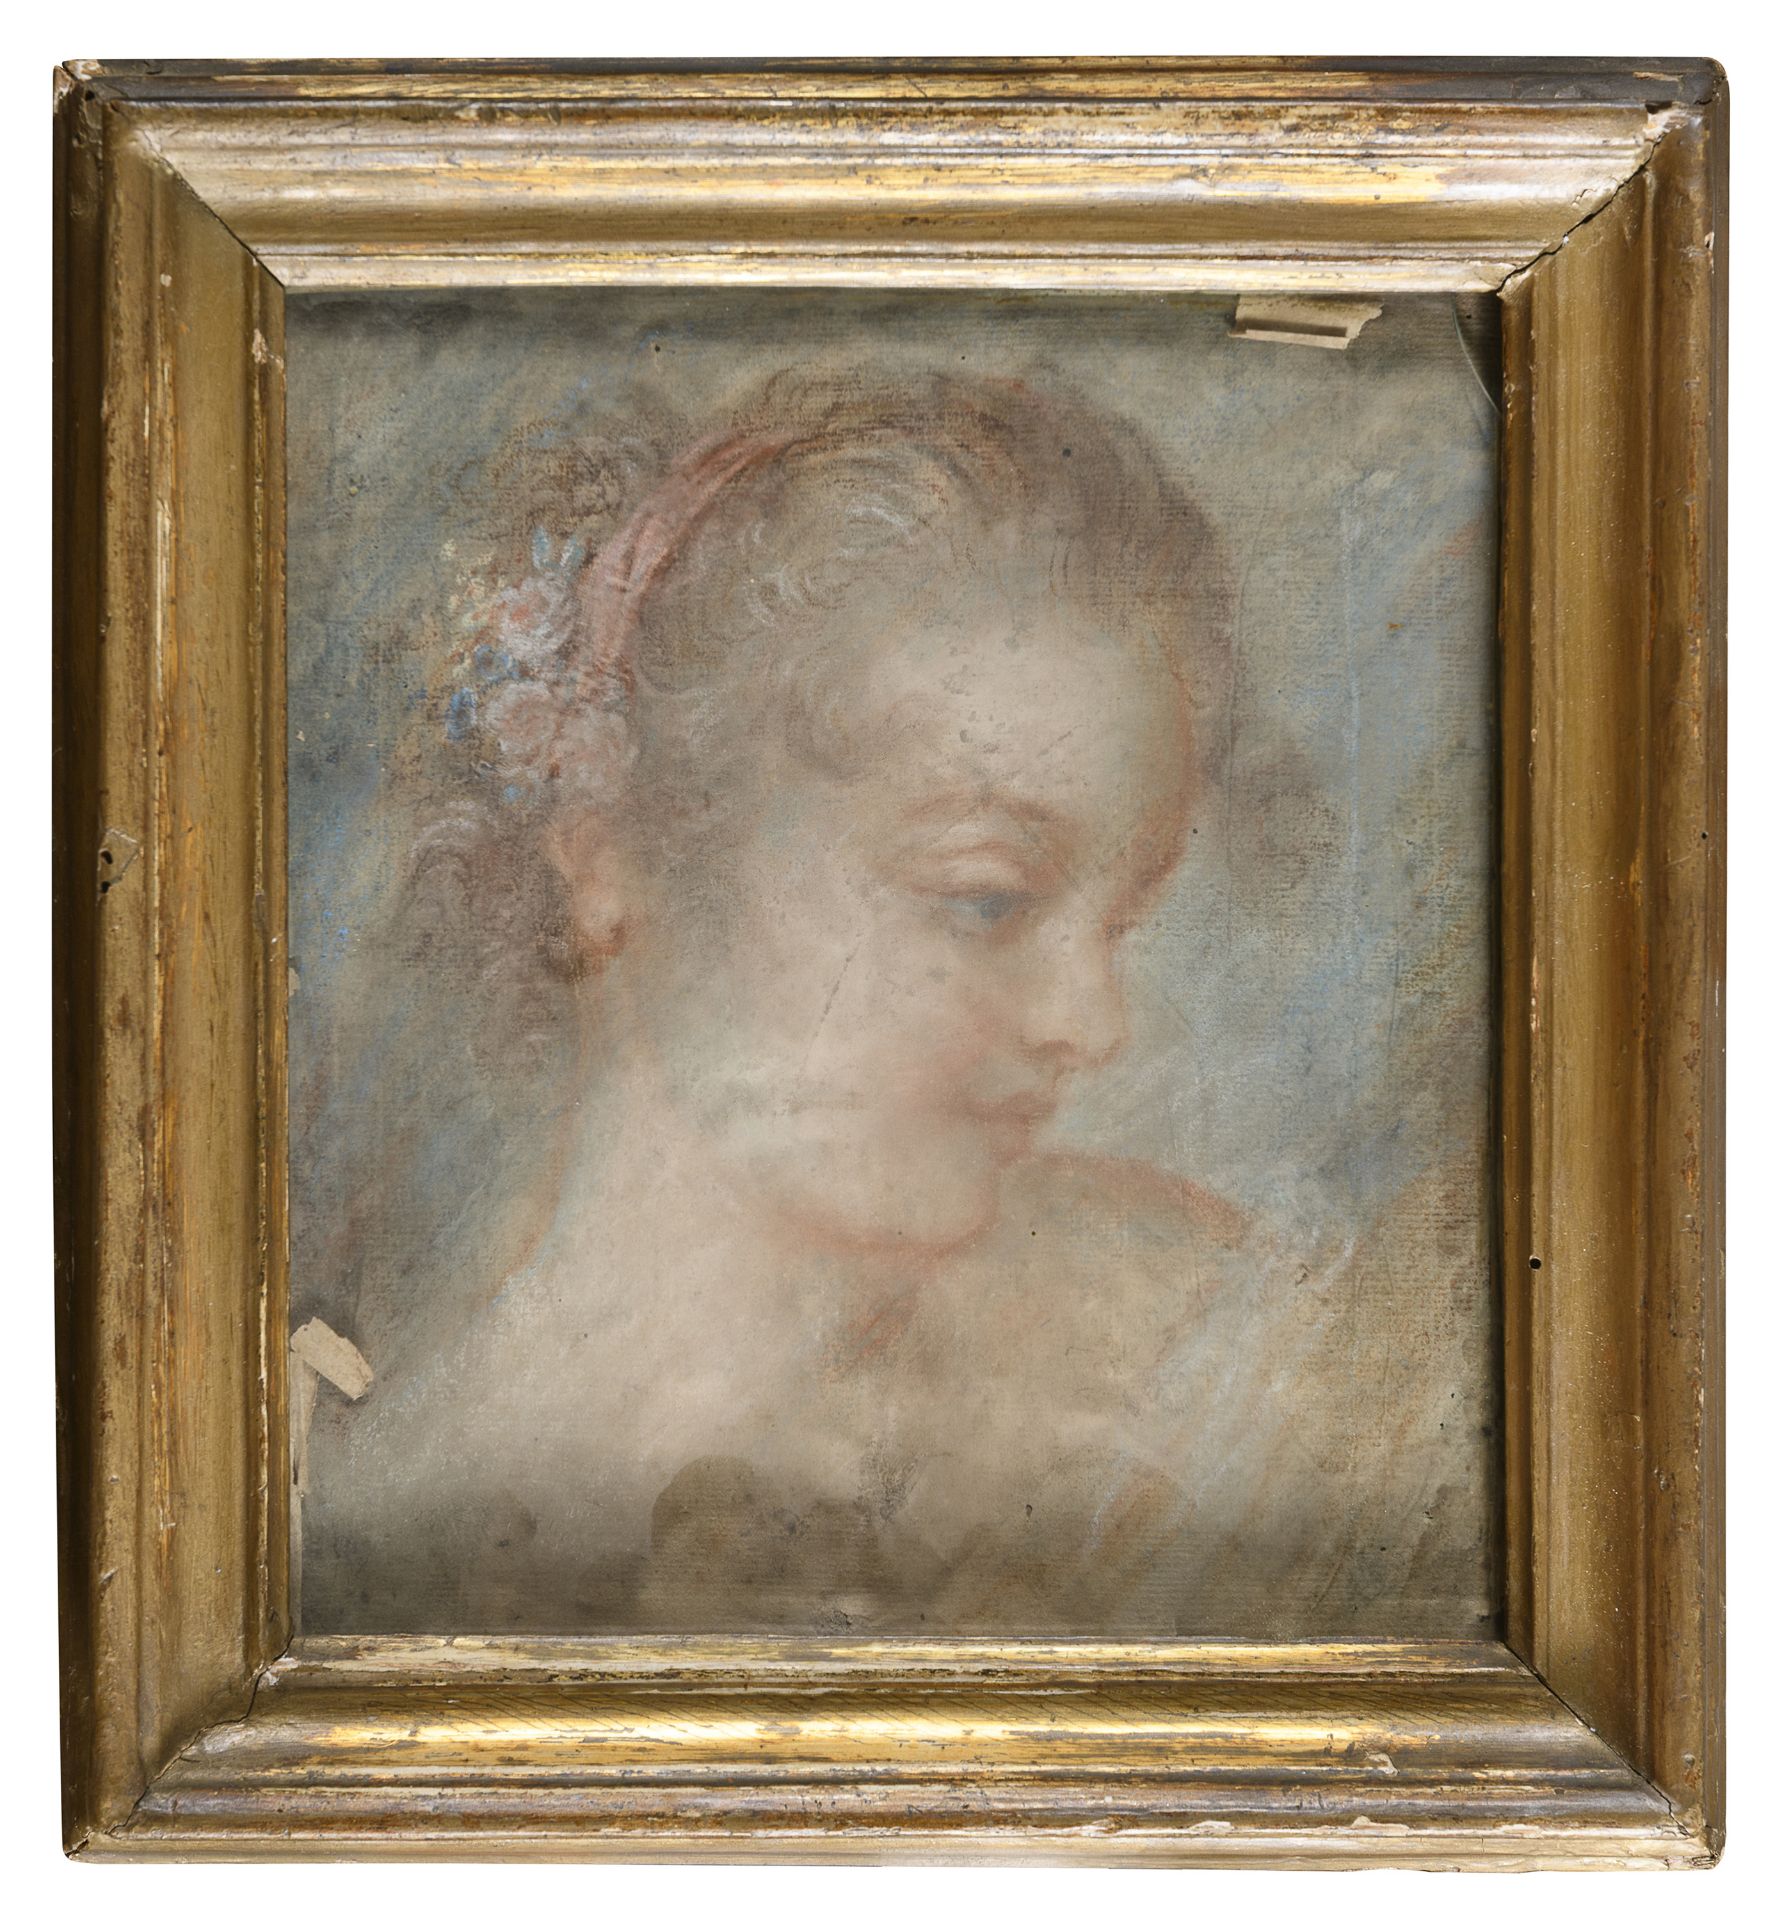 PASTEL DRAWING BY BENEDETTO LUTI att. to